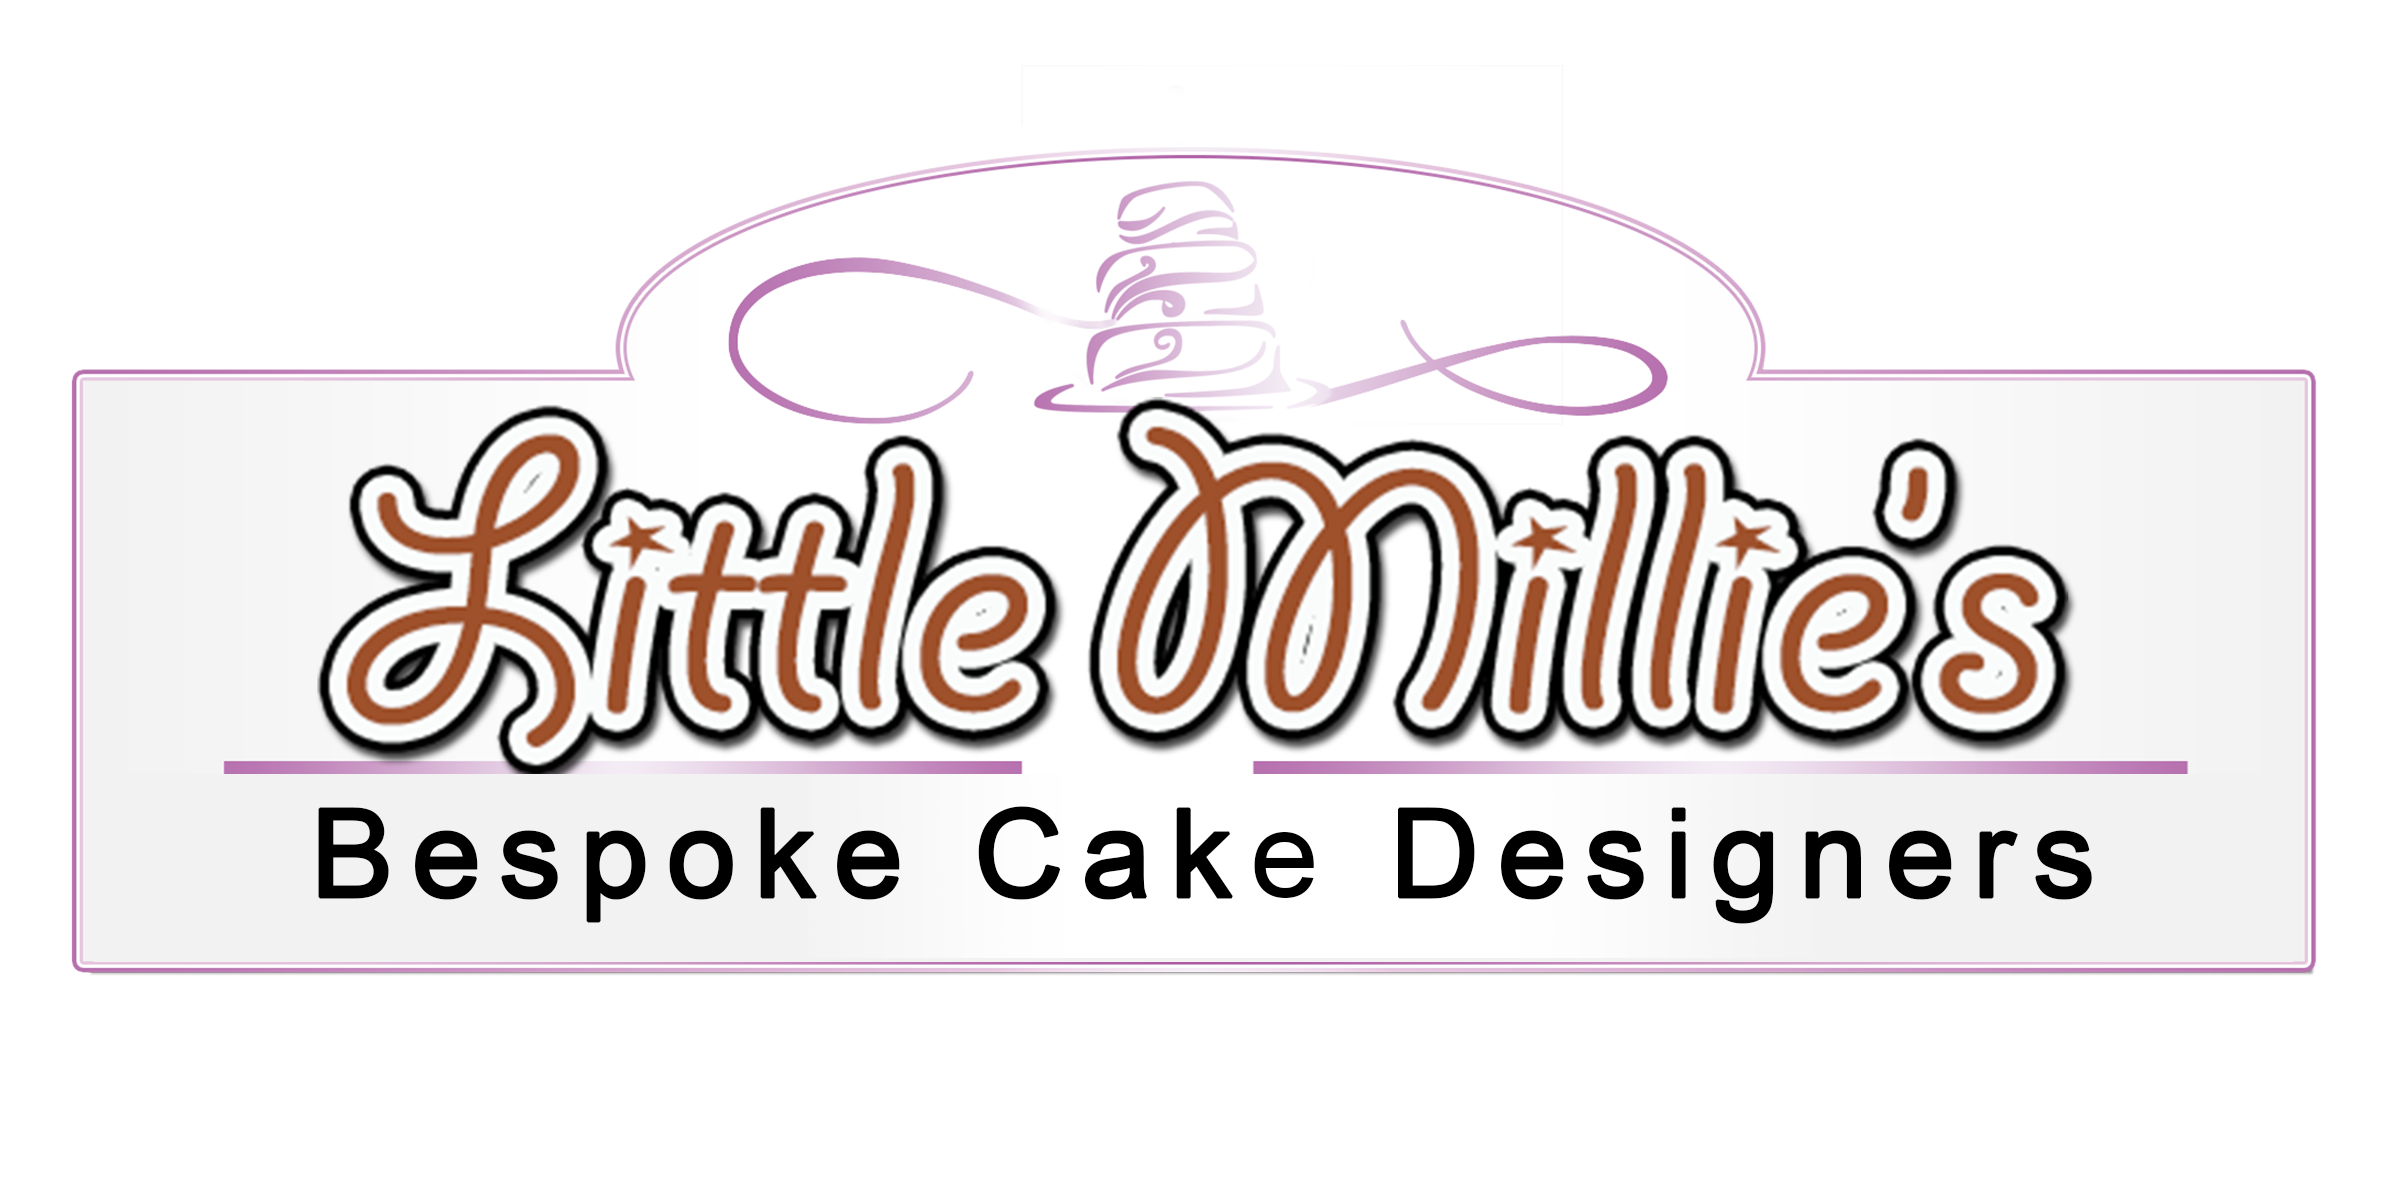 Norfolk and Suffolks best wedding cakes by little Millie's